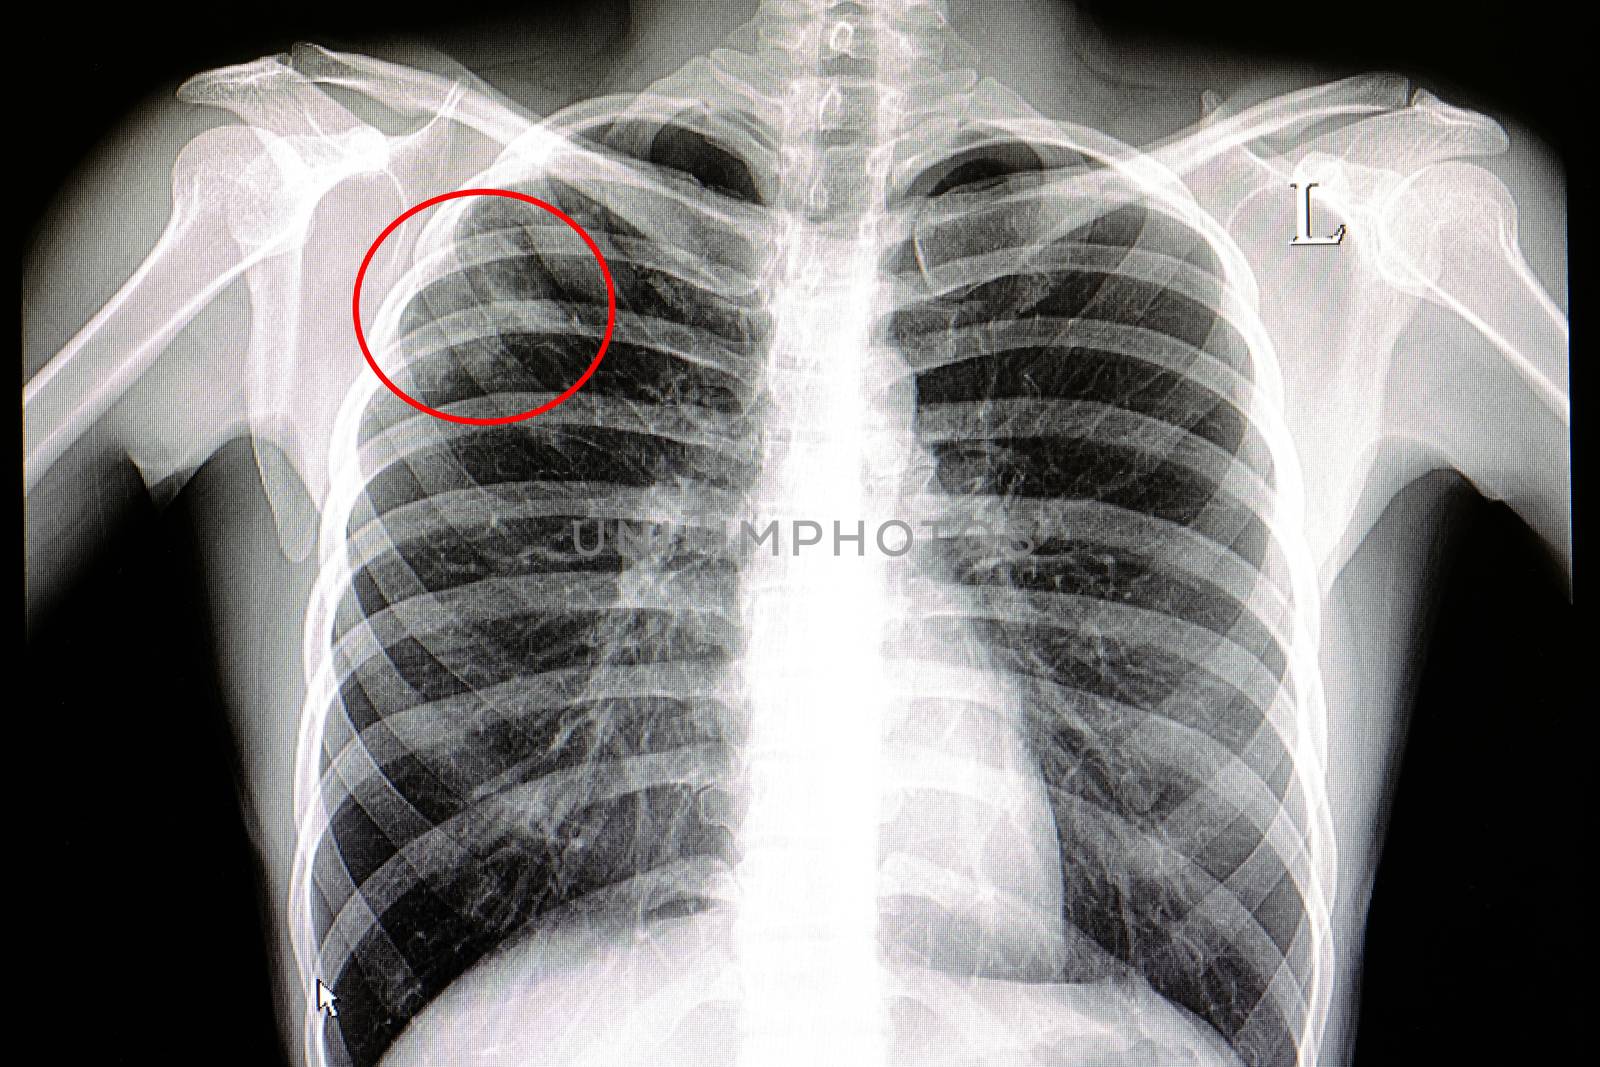 a chest x-ray film of a male patient showing rt upper lobe pulmonary tuberculosis